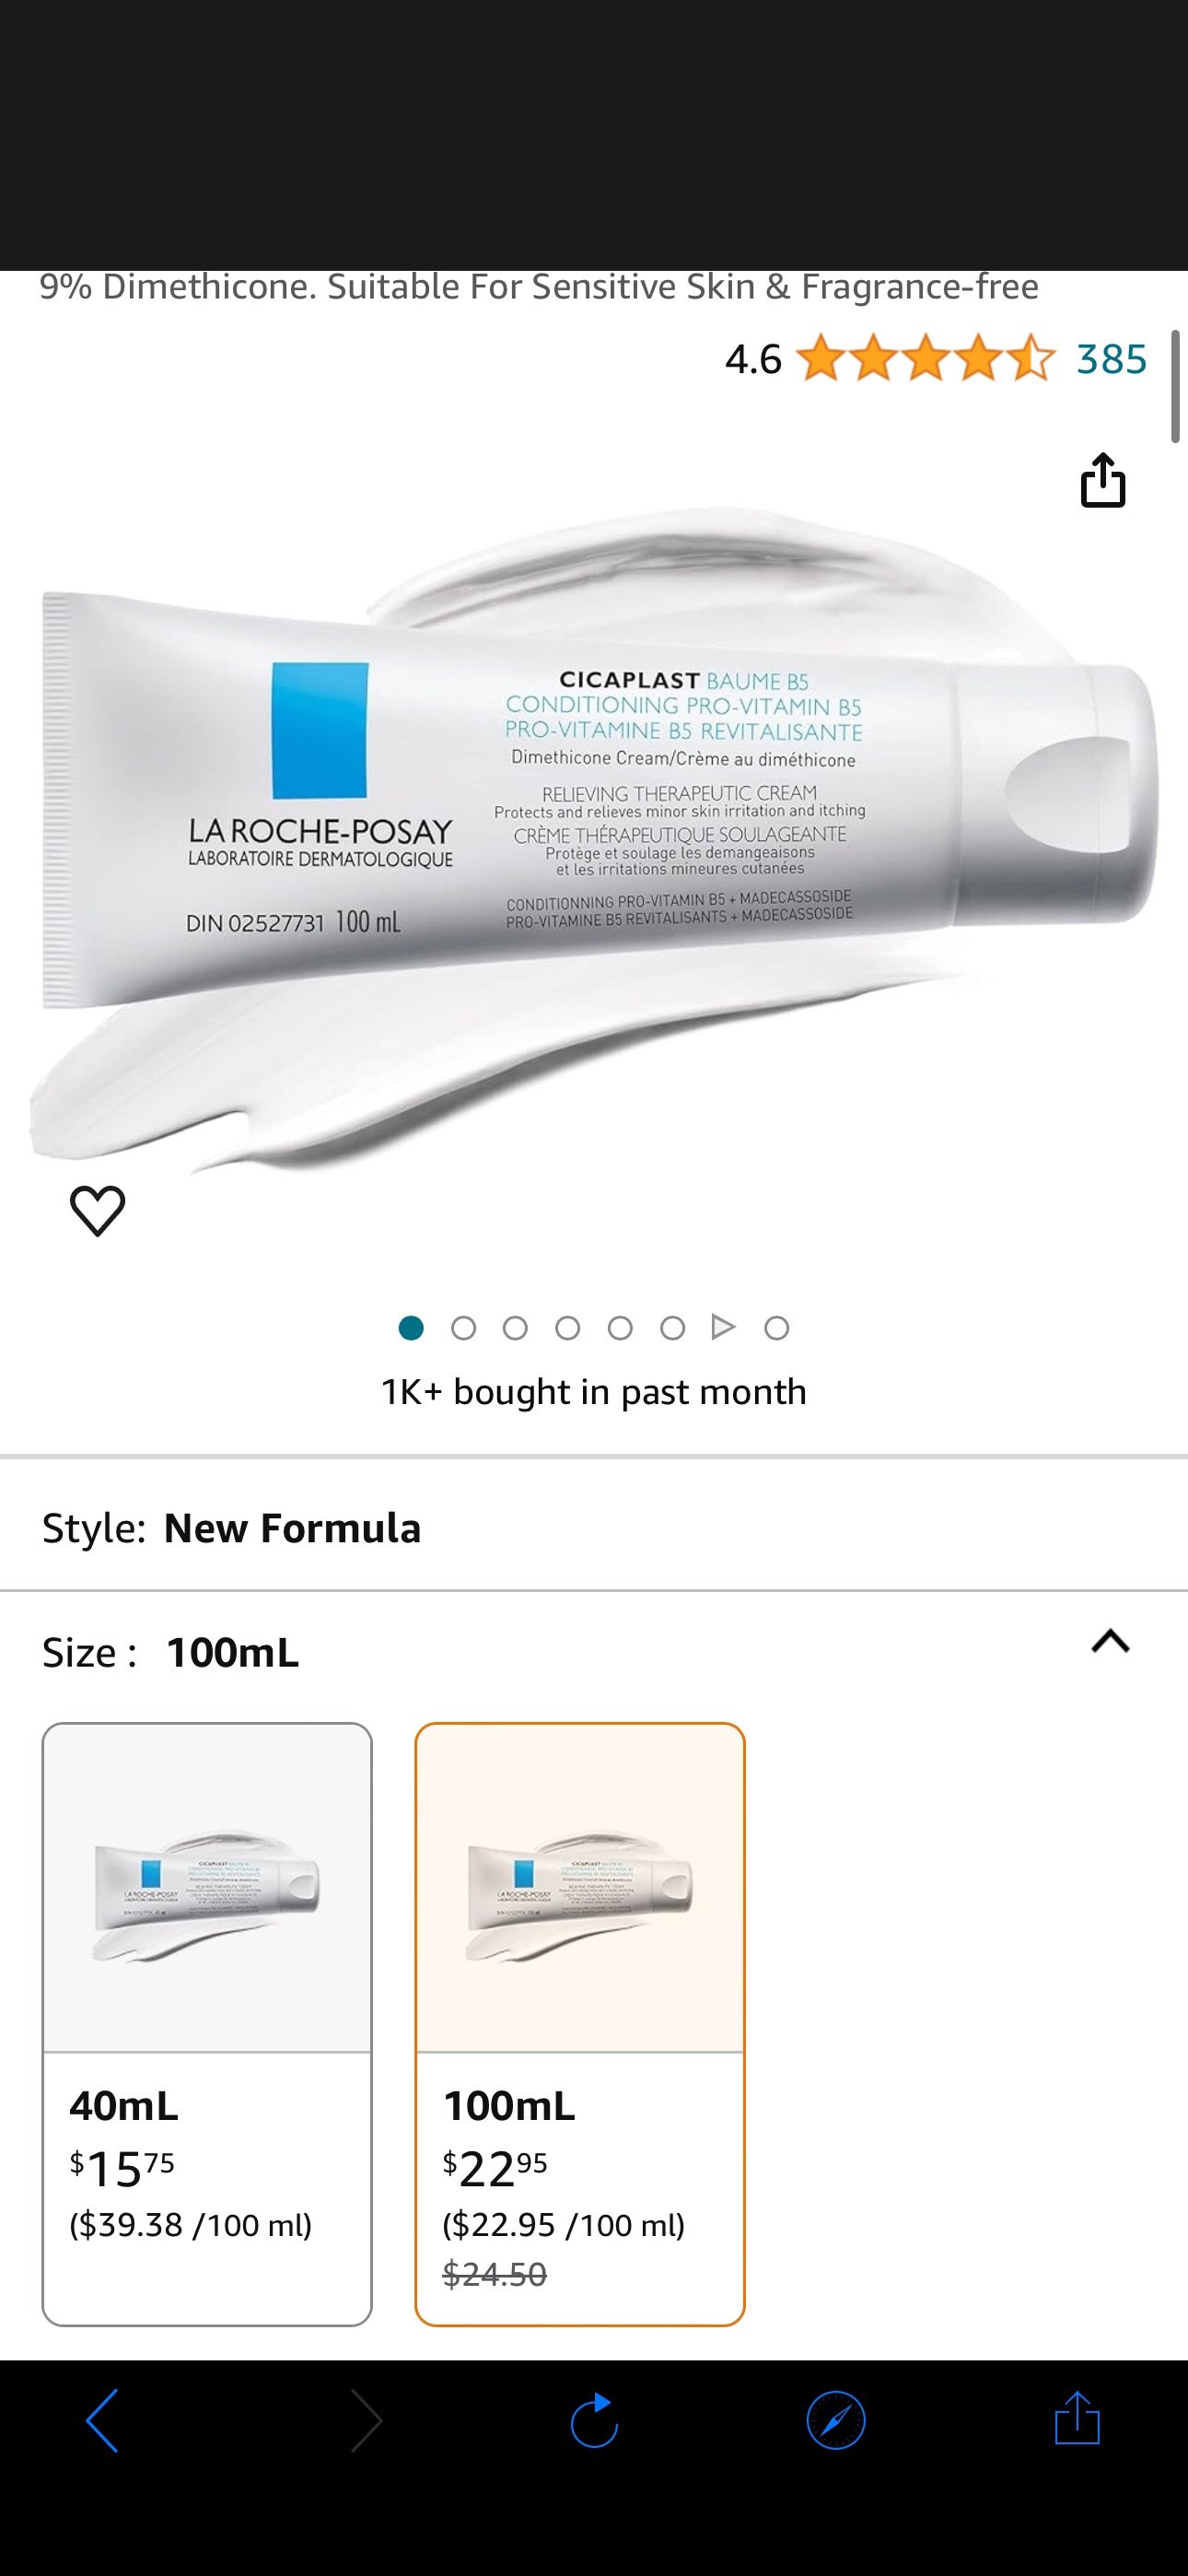 La Roche-Posay Cicaplast Baume B5 Dry Skin Repair Multipurpose Balm Moisturizer, For Babies, Children, Adolescents & Adults. Suitable For Sensitive Skin & Fragrance-free : Amazon.ca: Beauty & Personal